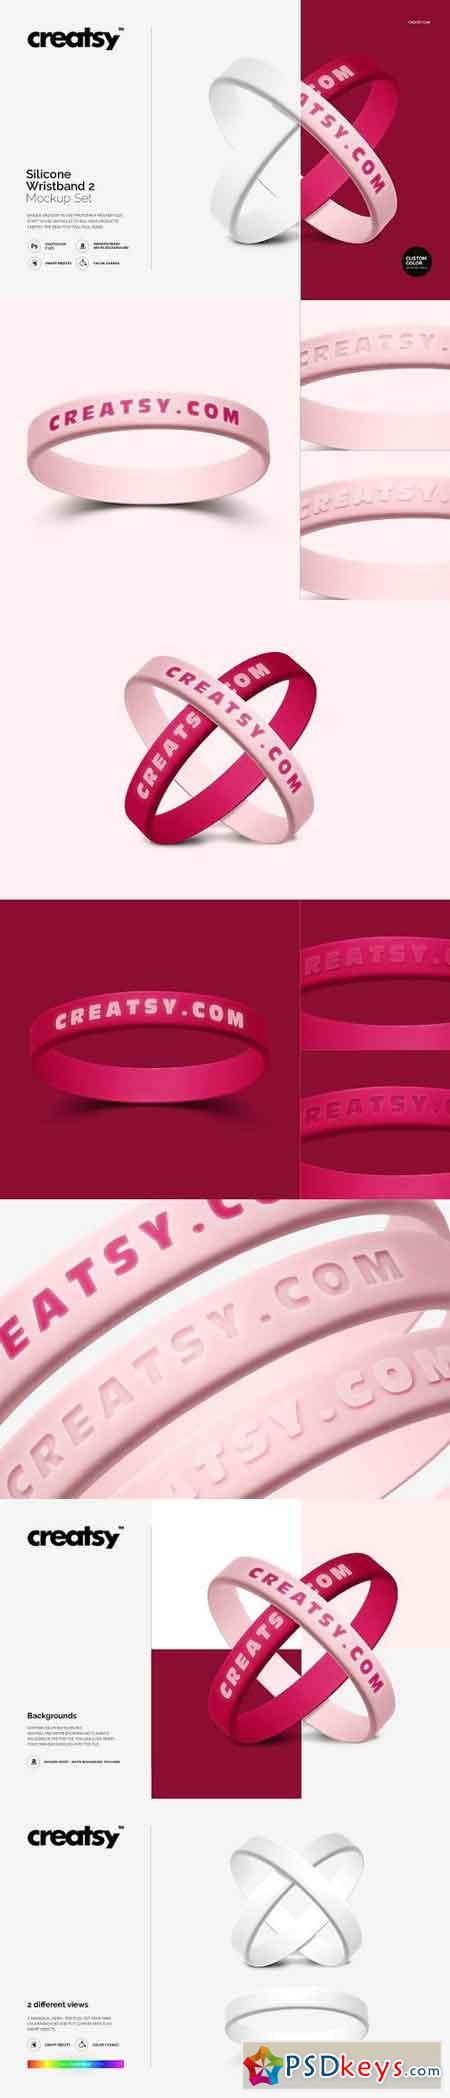 Download Silicone Wristband 2 Mockup Set 1196561 » Free Download ...